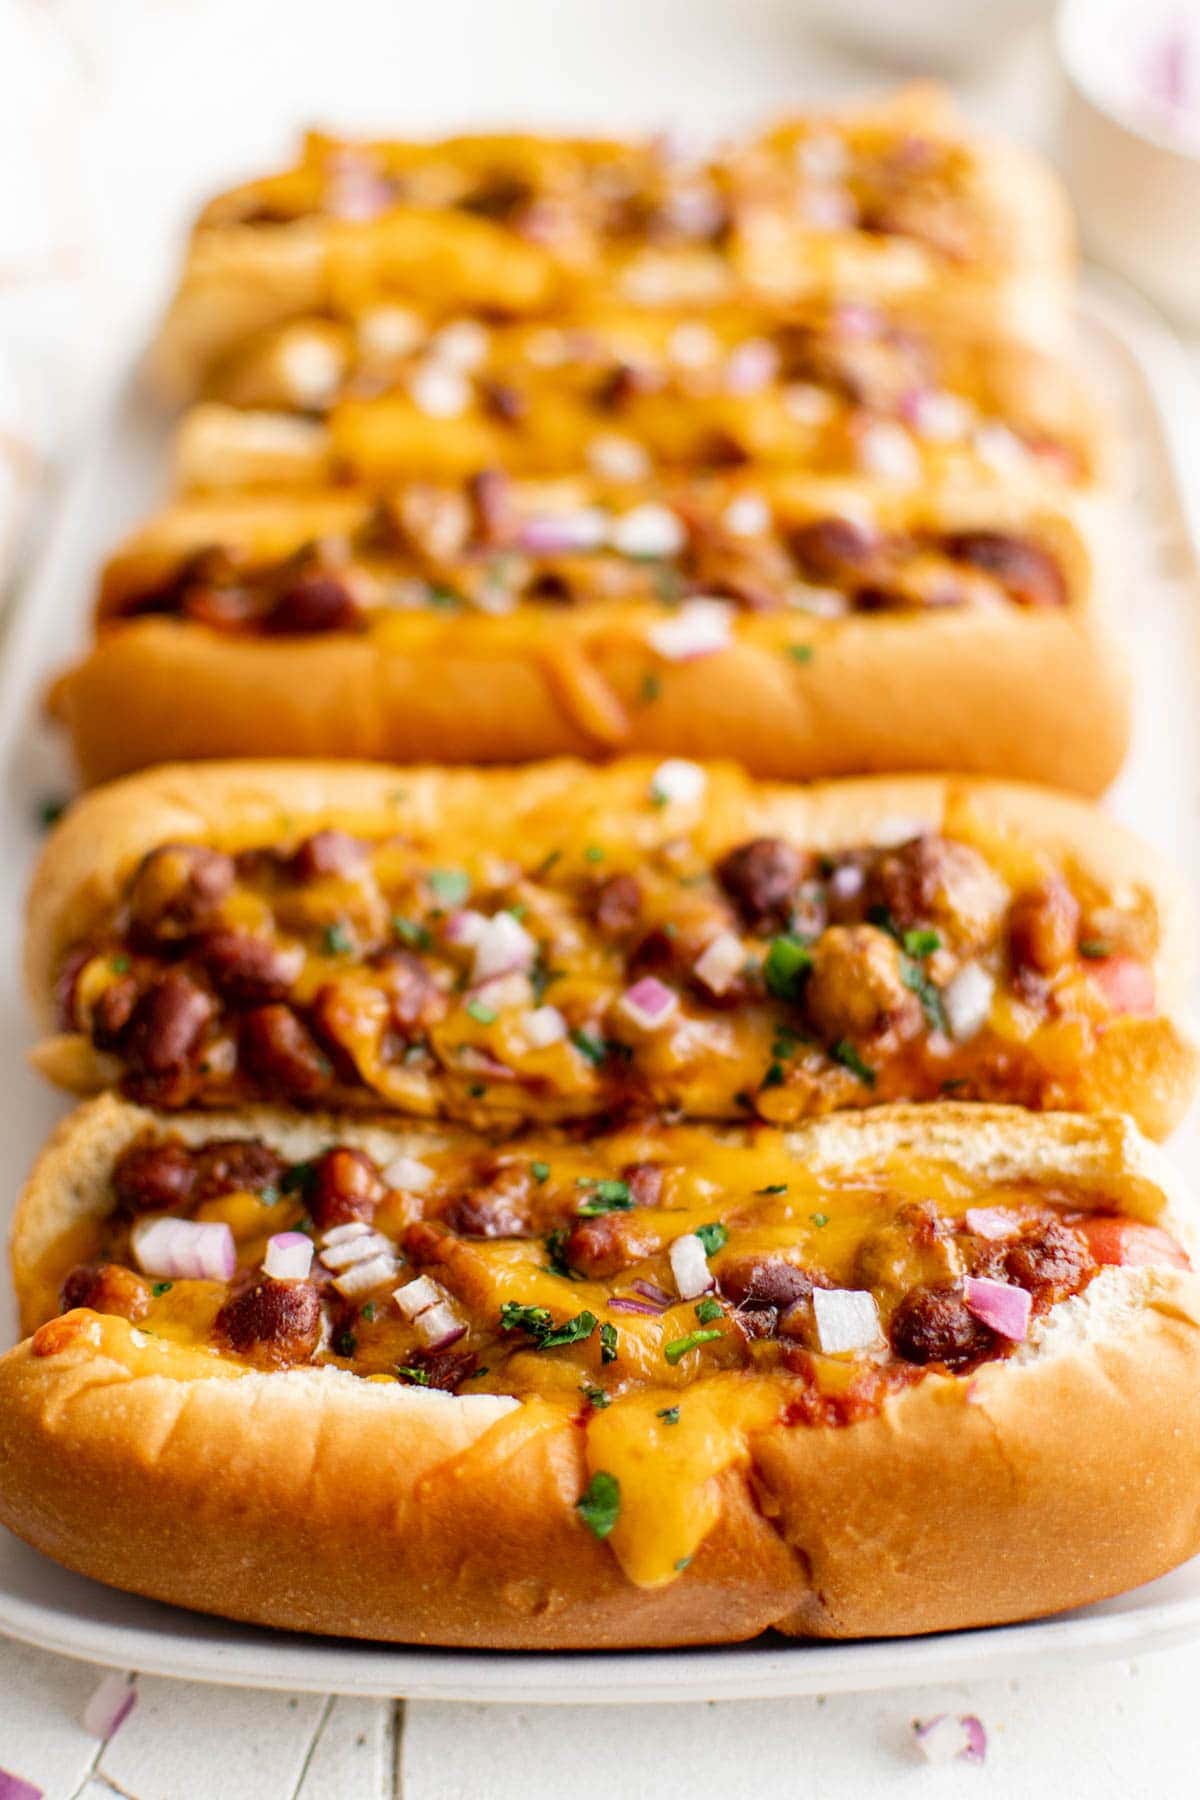 chili cheese dogs on a whilte platter